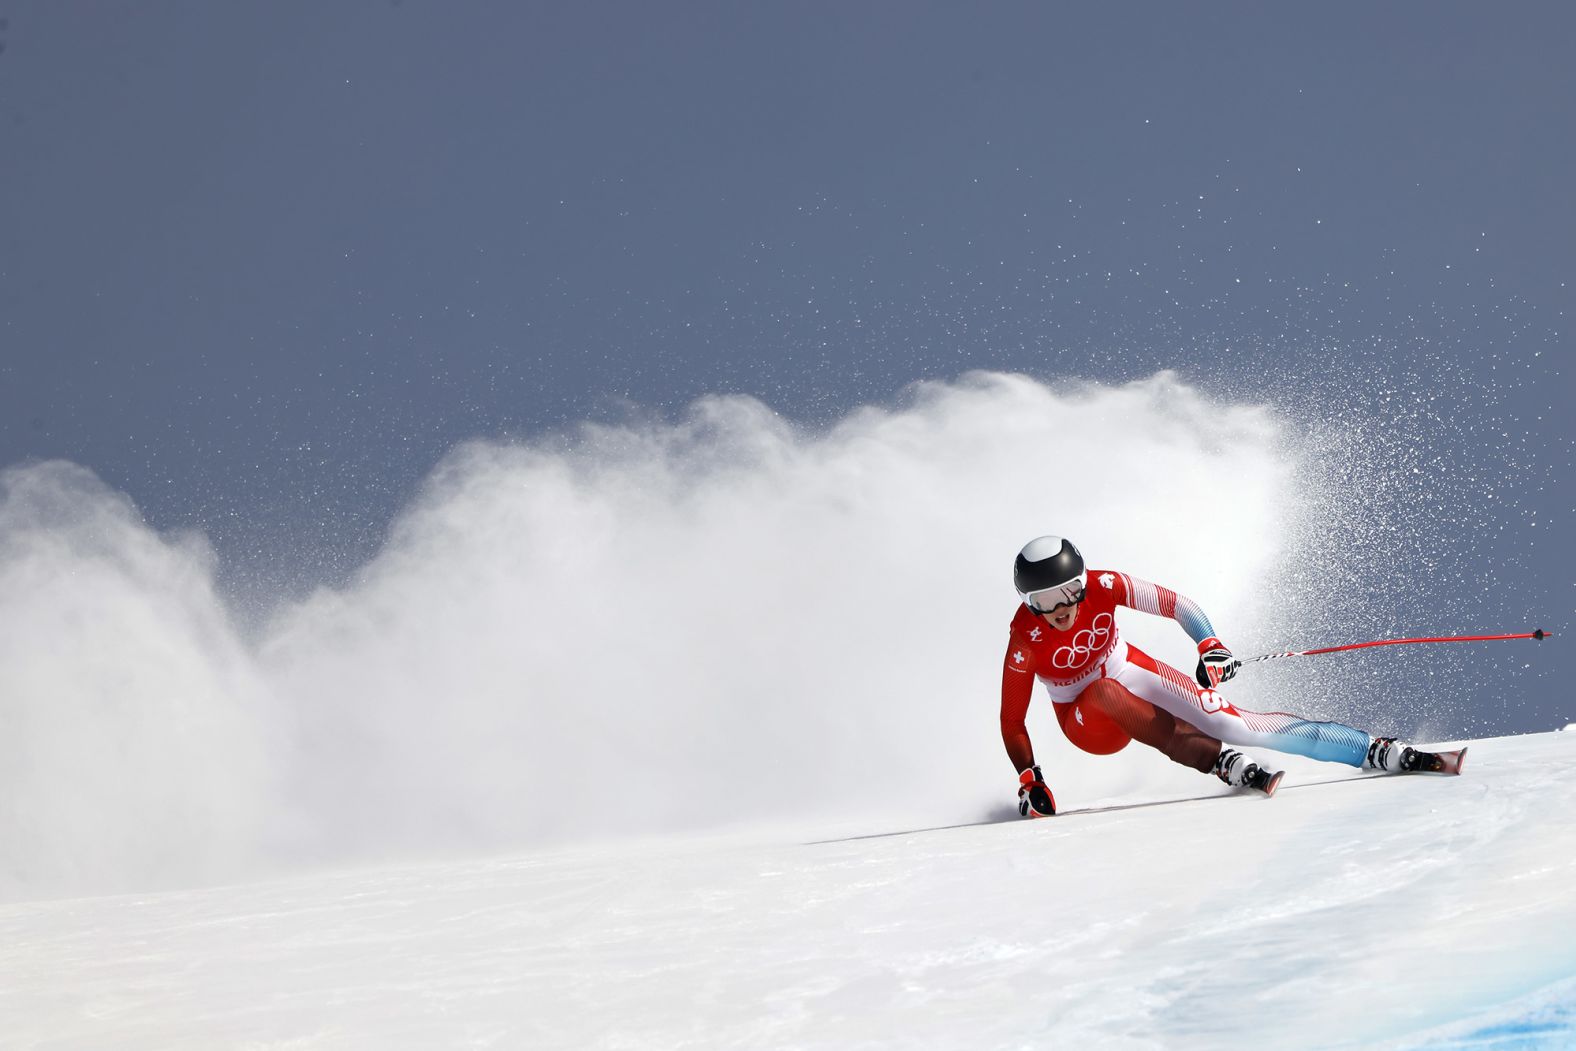 Swiss skier Michelle Gisin competes in the downhill portion of the combined event, <a href="index.php?page=&url=https%3A%2F%2Fwww.cnn.com%2Fworld%2Flive-news%2Fbeijing-winter-olympics-02-17-22-spt%2Fh_7aef567855037502ceb1dd99d6ef8809" target="_blank">which she won for the second straight Olympics.</a> Gisin was 12th after the downhill but dominated in the slalom to move into first.